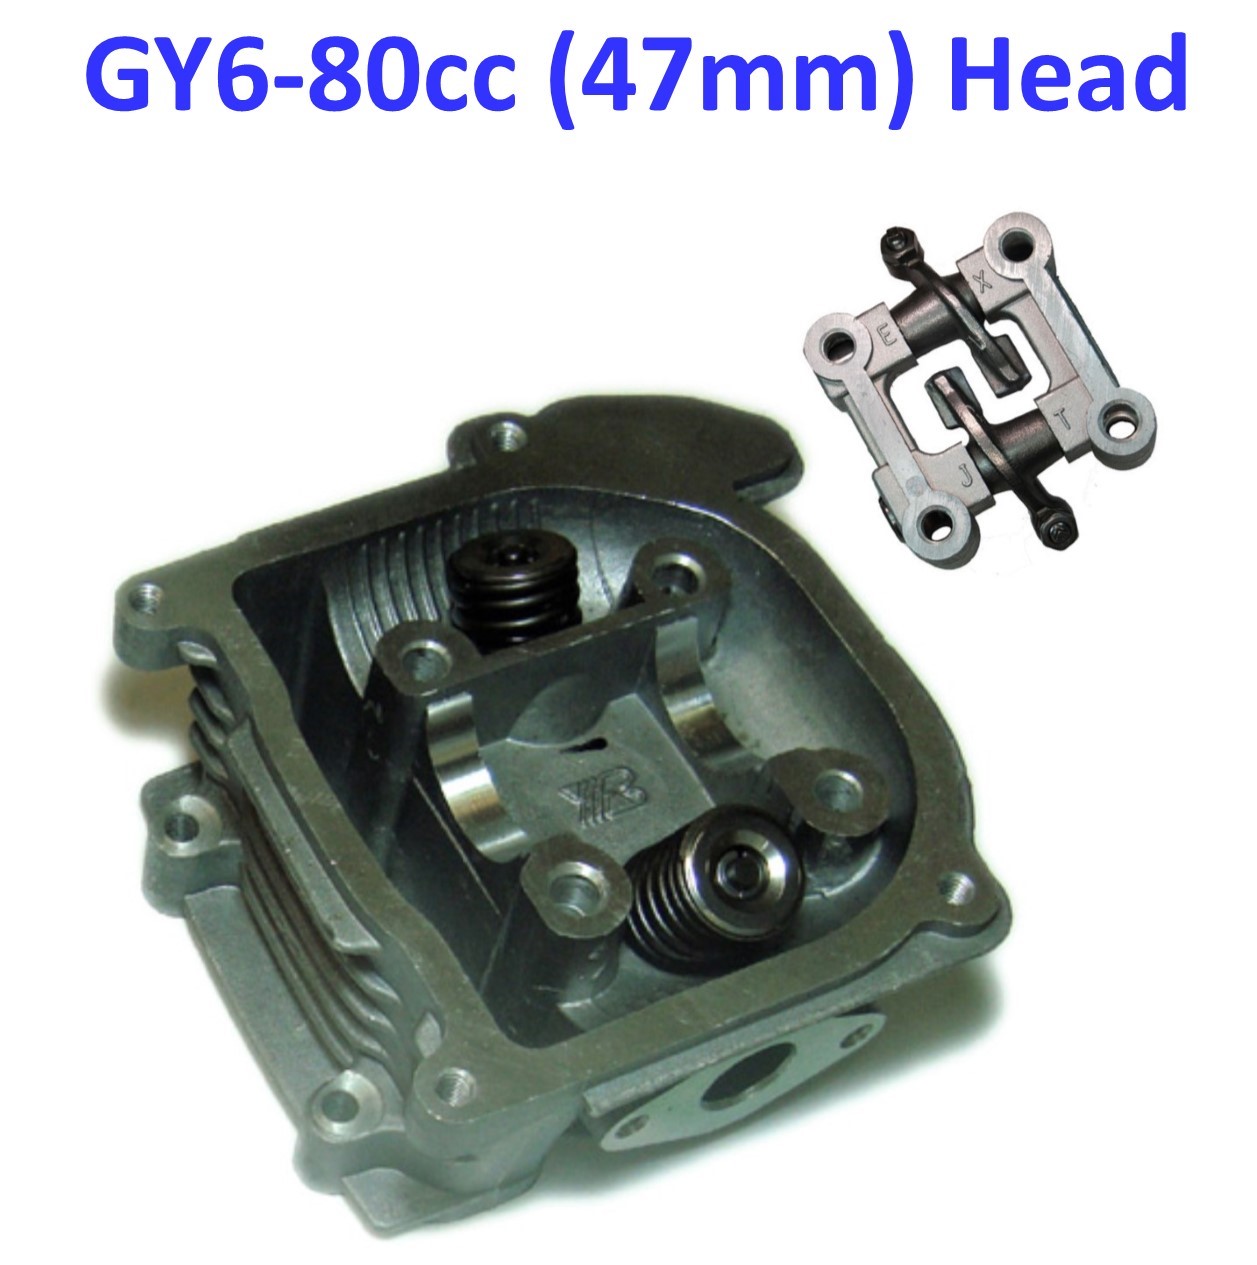 80cc Cylinder Head 47mm For GY6-50 QMB139 Scooter Motors. Valves Installed. With Rocker Arm Assy.